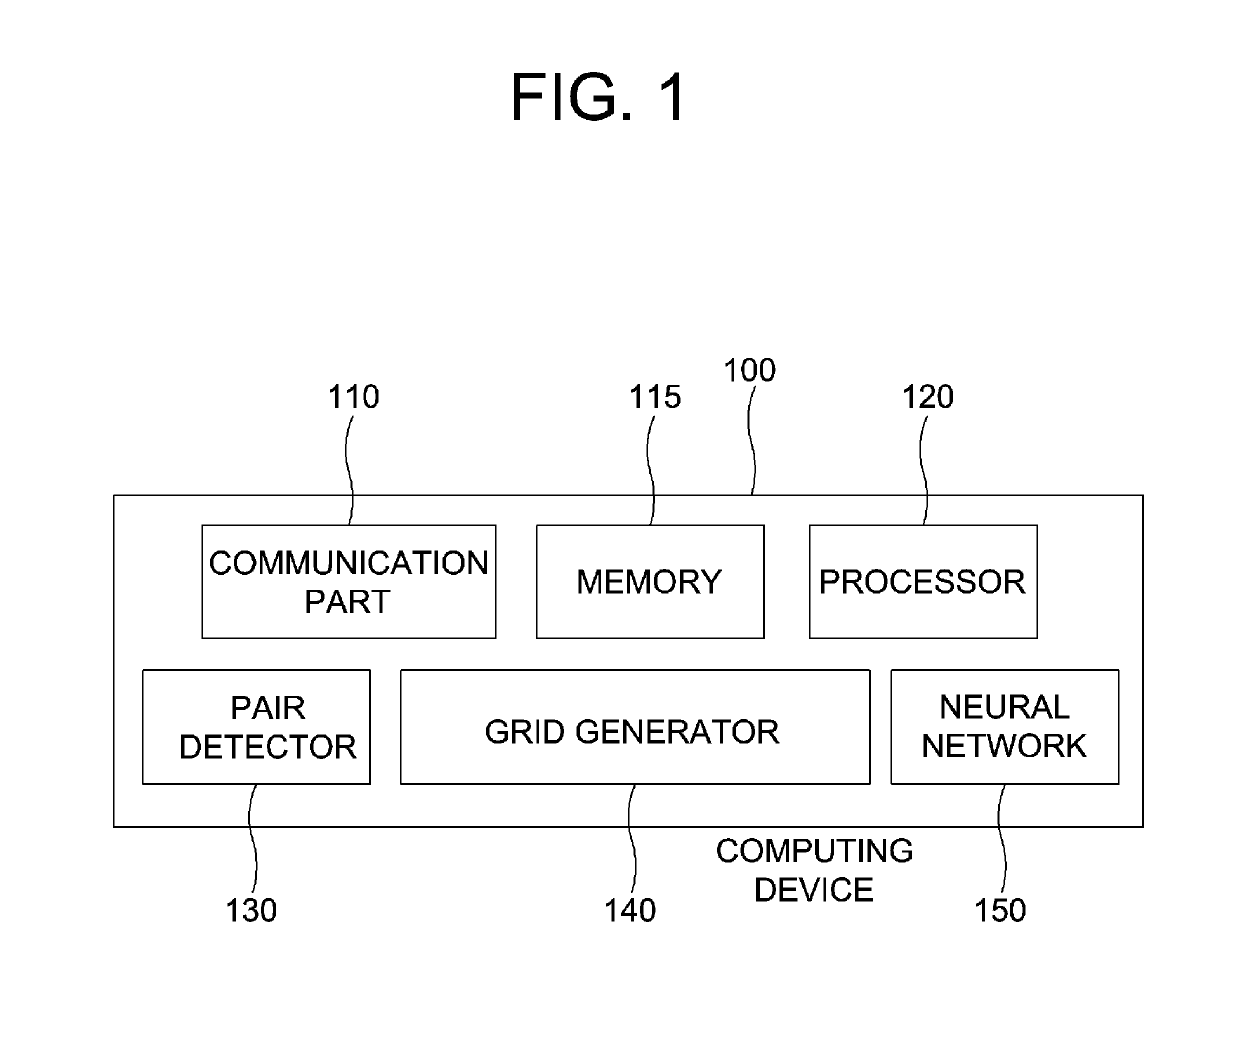 Method and device of neural network operations using a grid generator for converting modes according to classes of areas to satisfy level 4 of autonomous vehicles